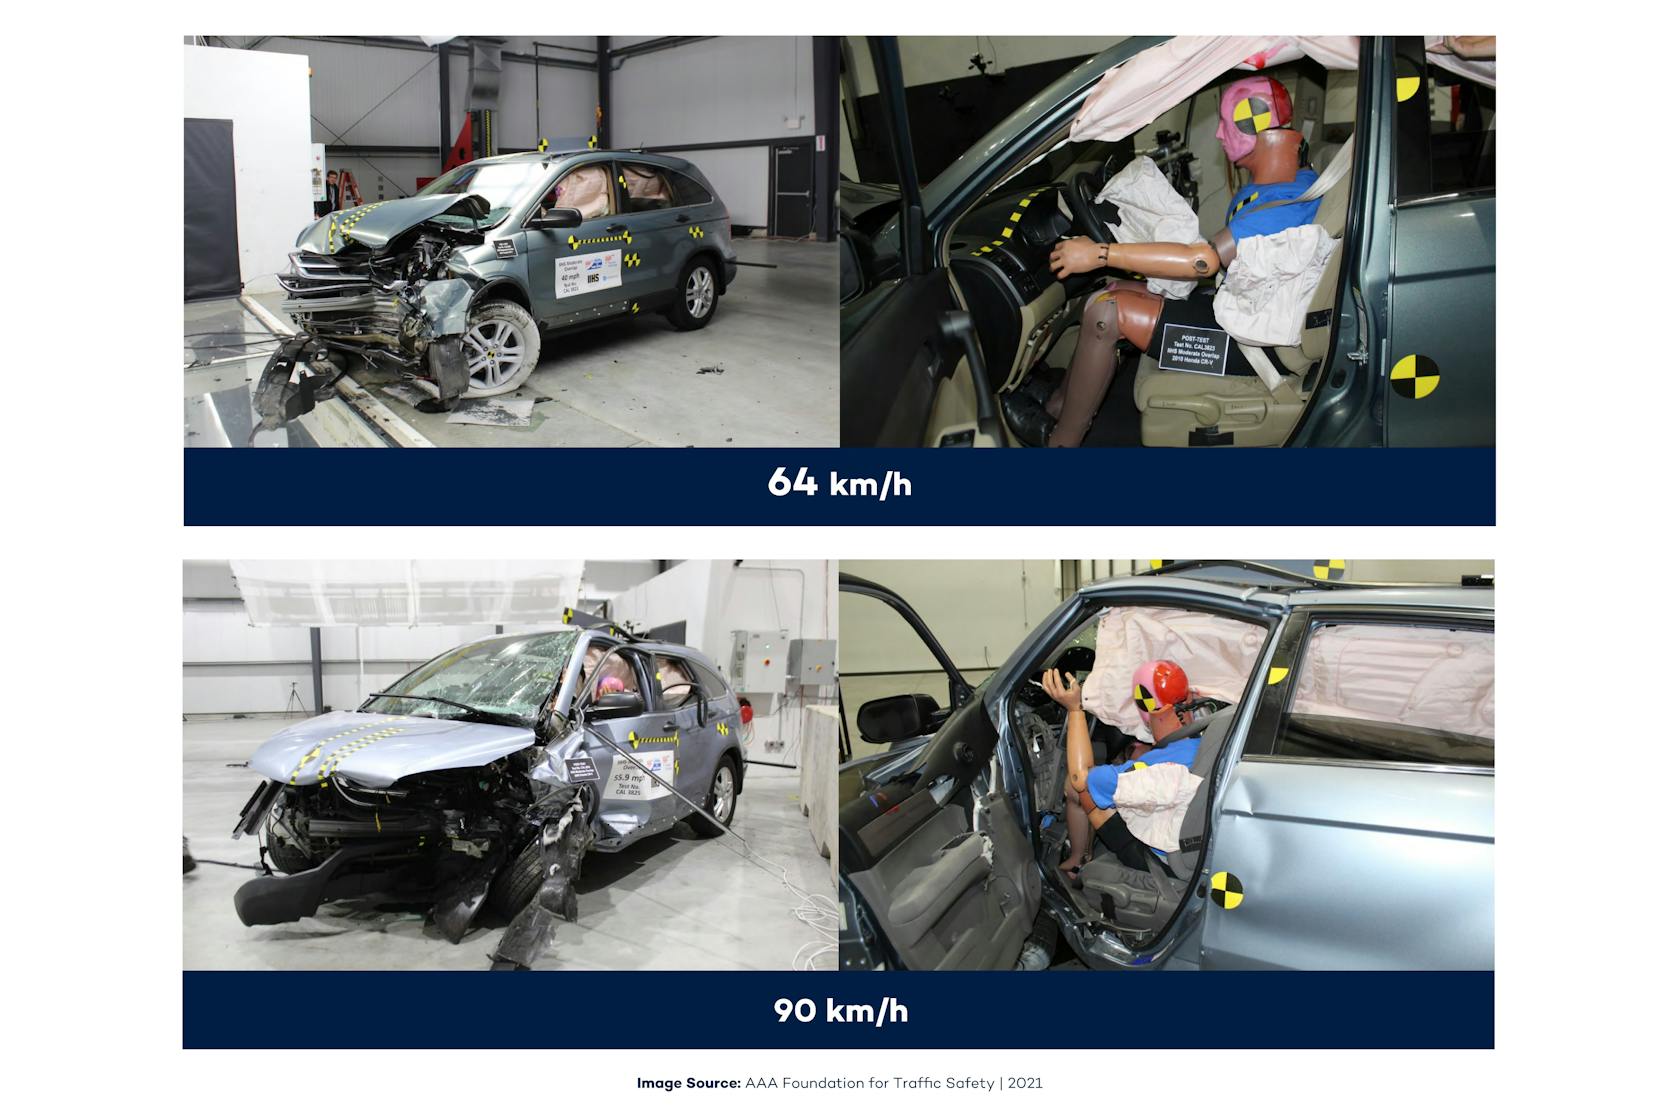 Four pictures of crash test. Two showing the effects of a crash at 64 km/h, two shoing the speed 90 km/h.